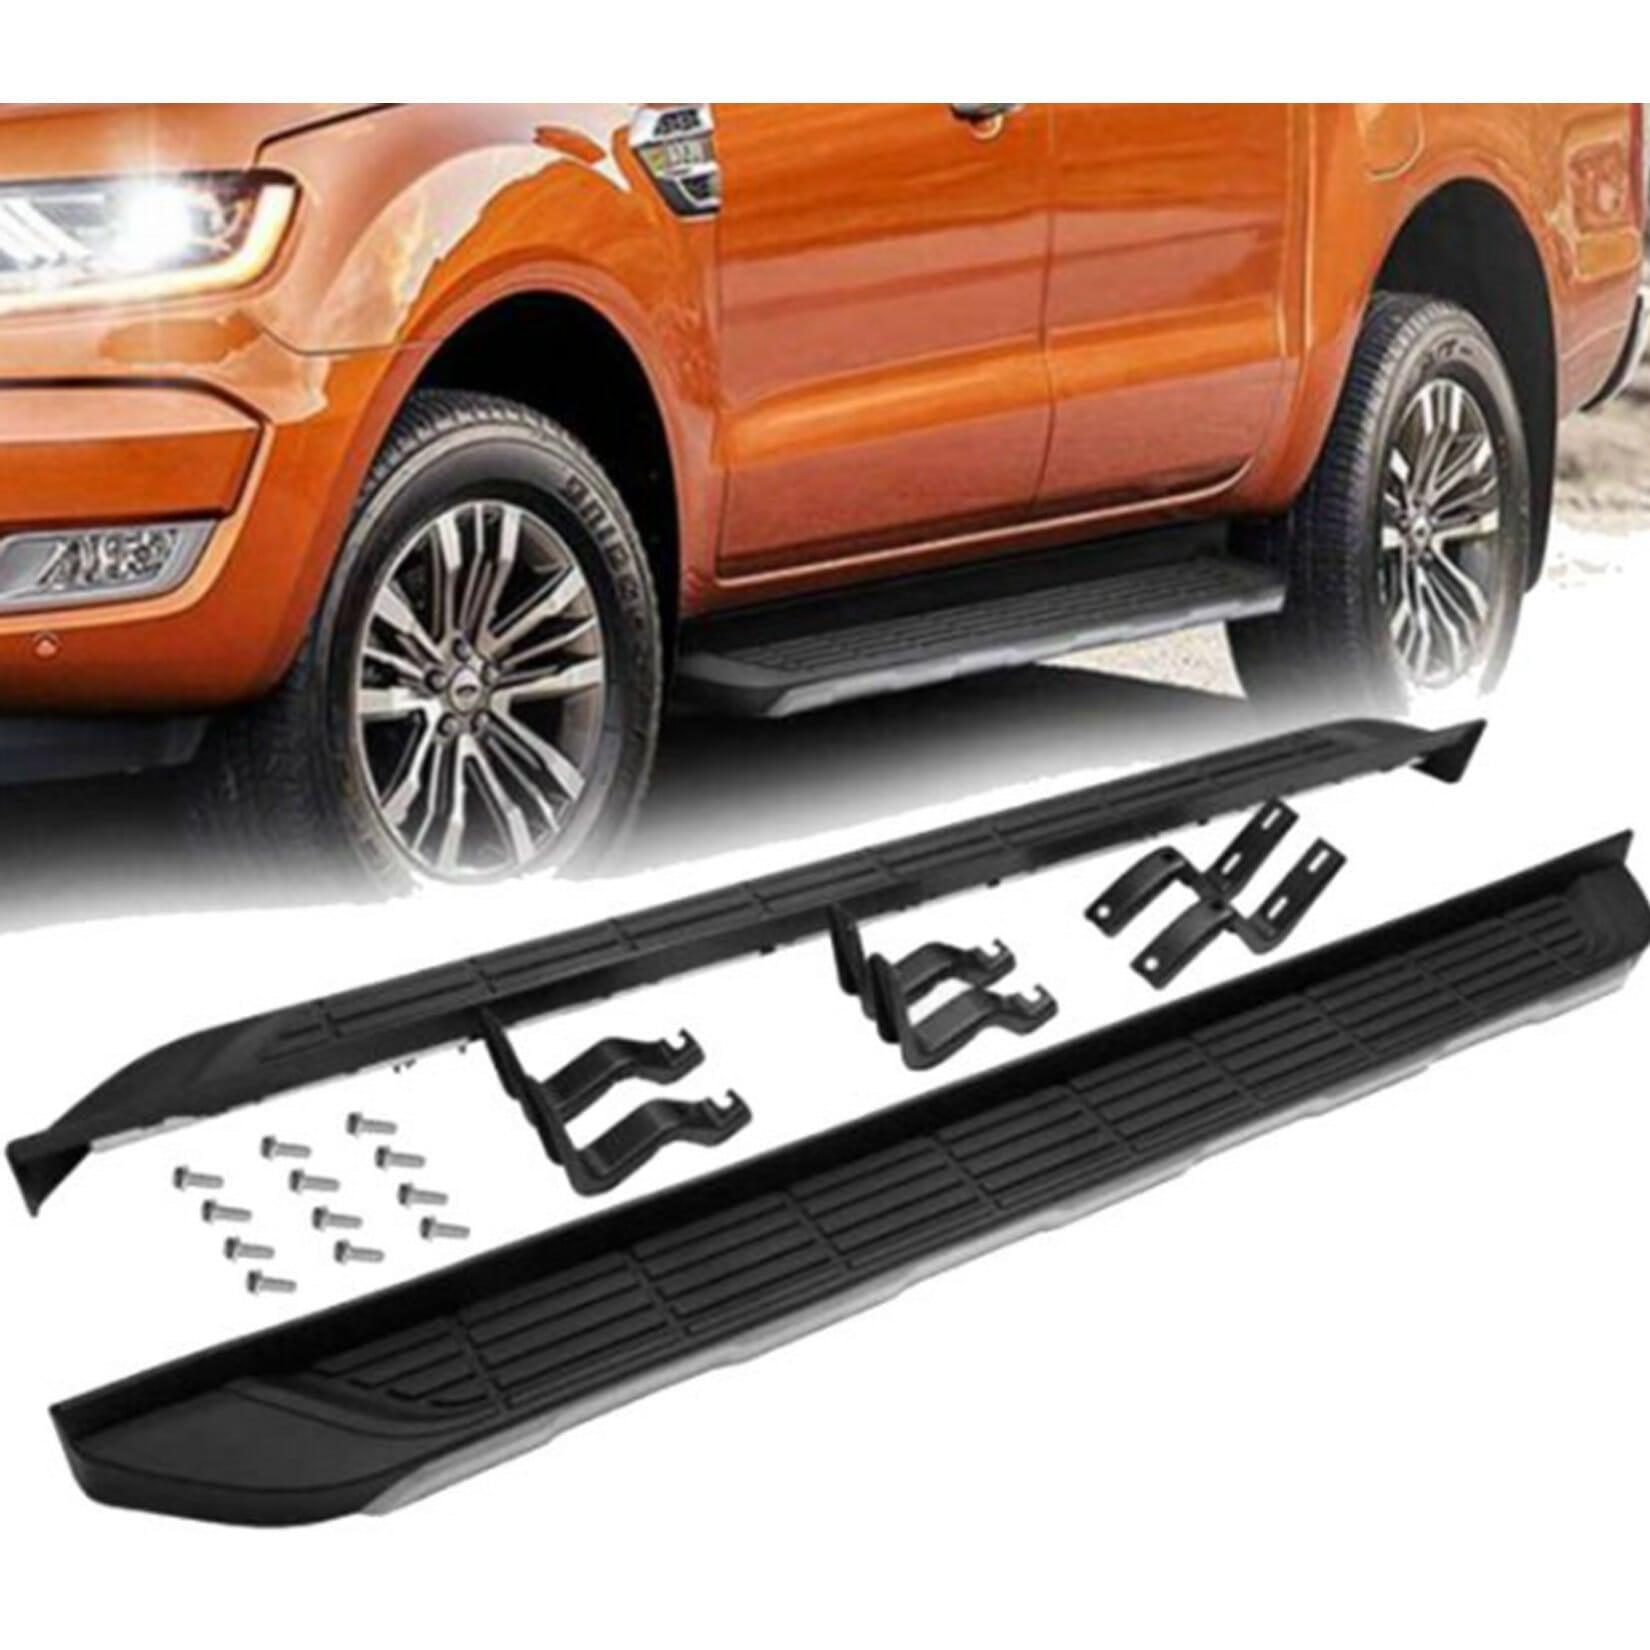 FORD RANGER T6 - 2012-2022 - OEM STYLE RUNNING BOARDS - SIDE STEPS - PAIR - Storm Xccessories2